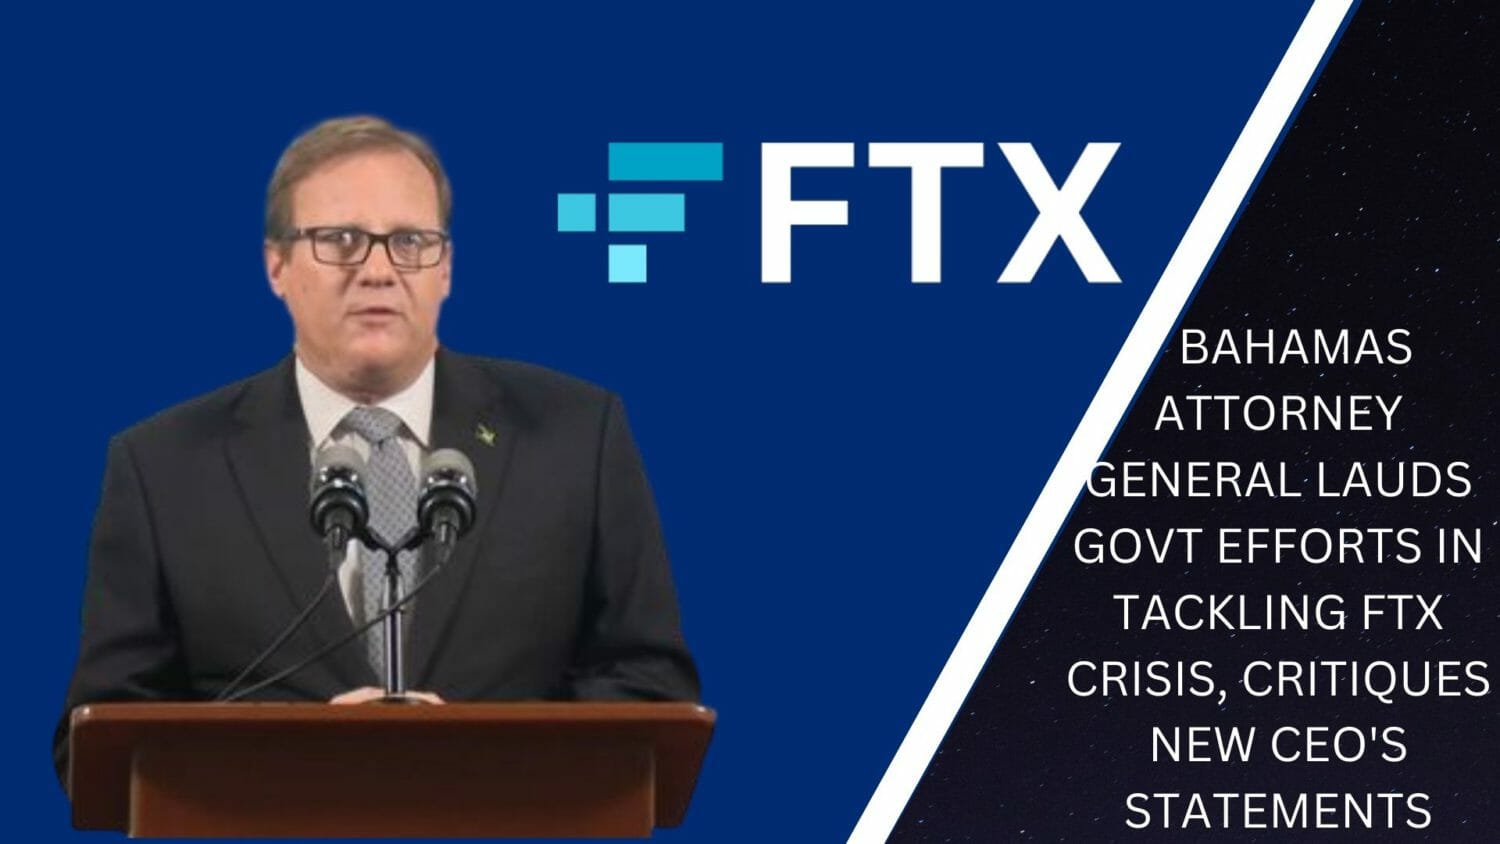 Bahamas Attorney General Lauds Govt Efforts In Tackling Ftx Crisis, Critiques New Ceo'S Statements